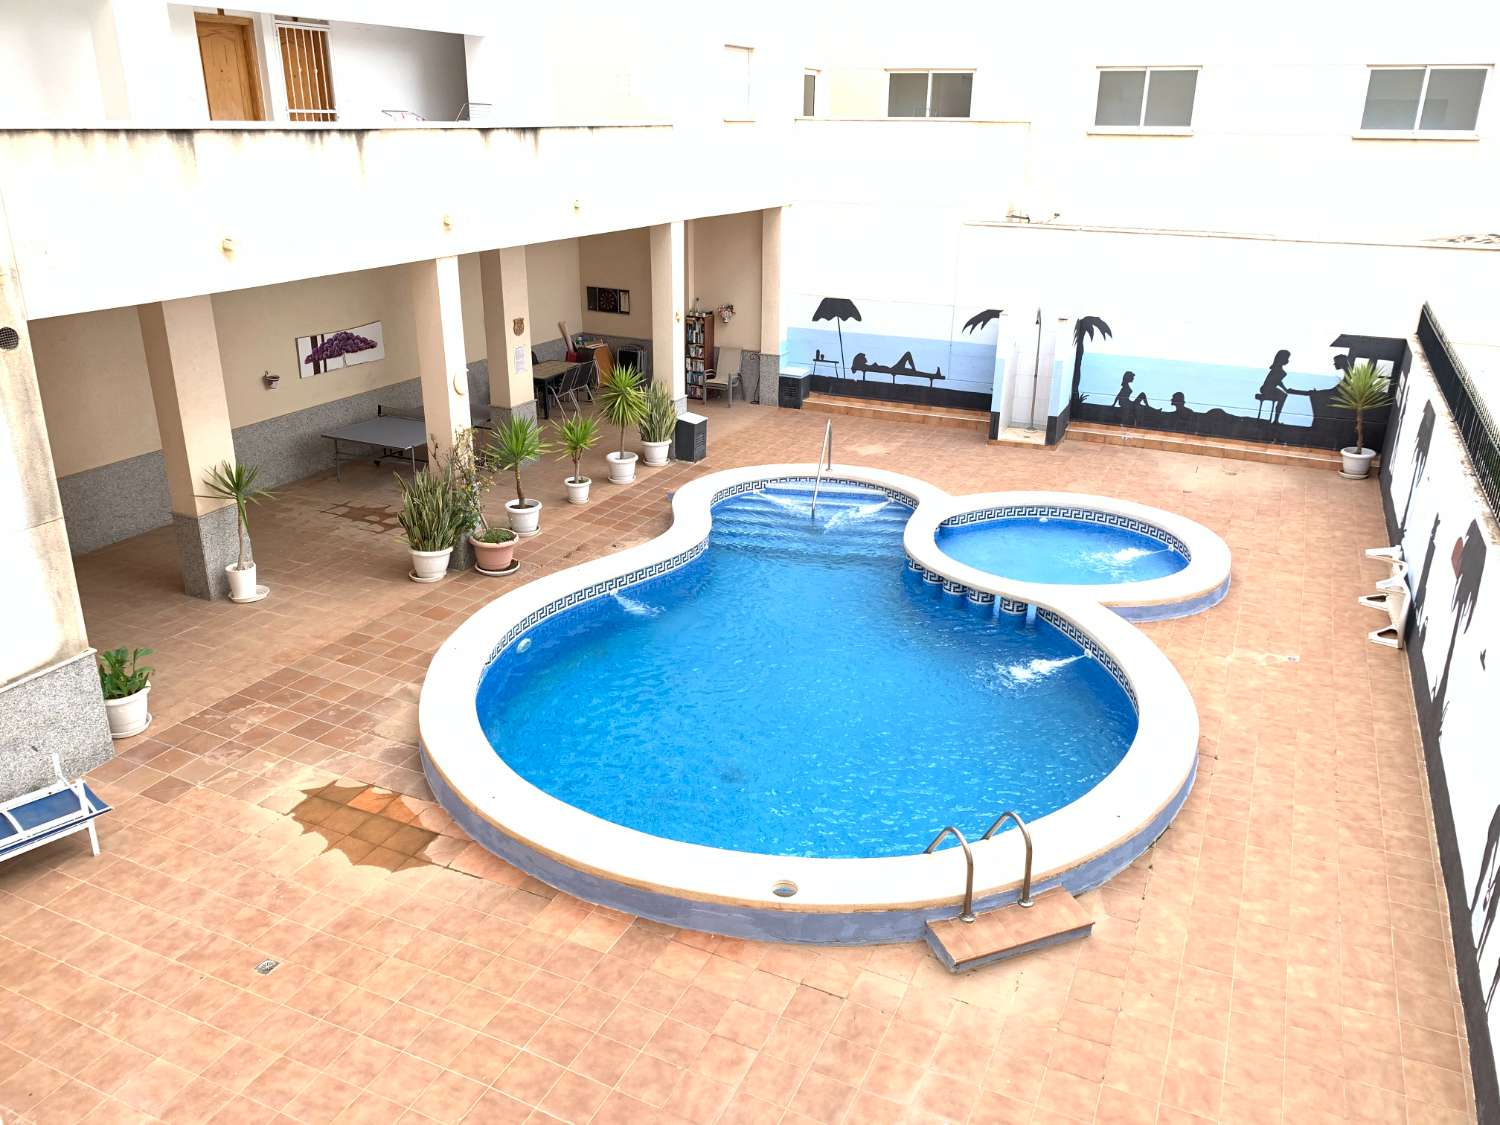 CHANCE!! TWO BEDROOM APARTMENT WITH STORAGE ROOM AND POOL IN ALMORADI!!